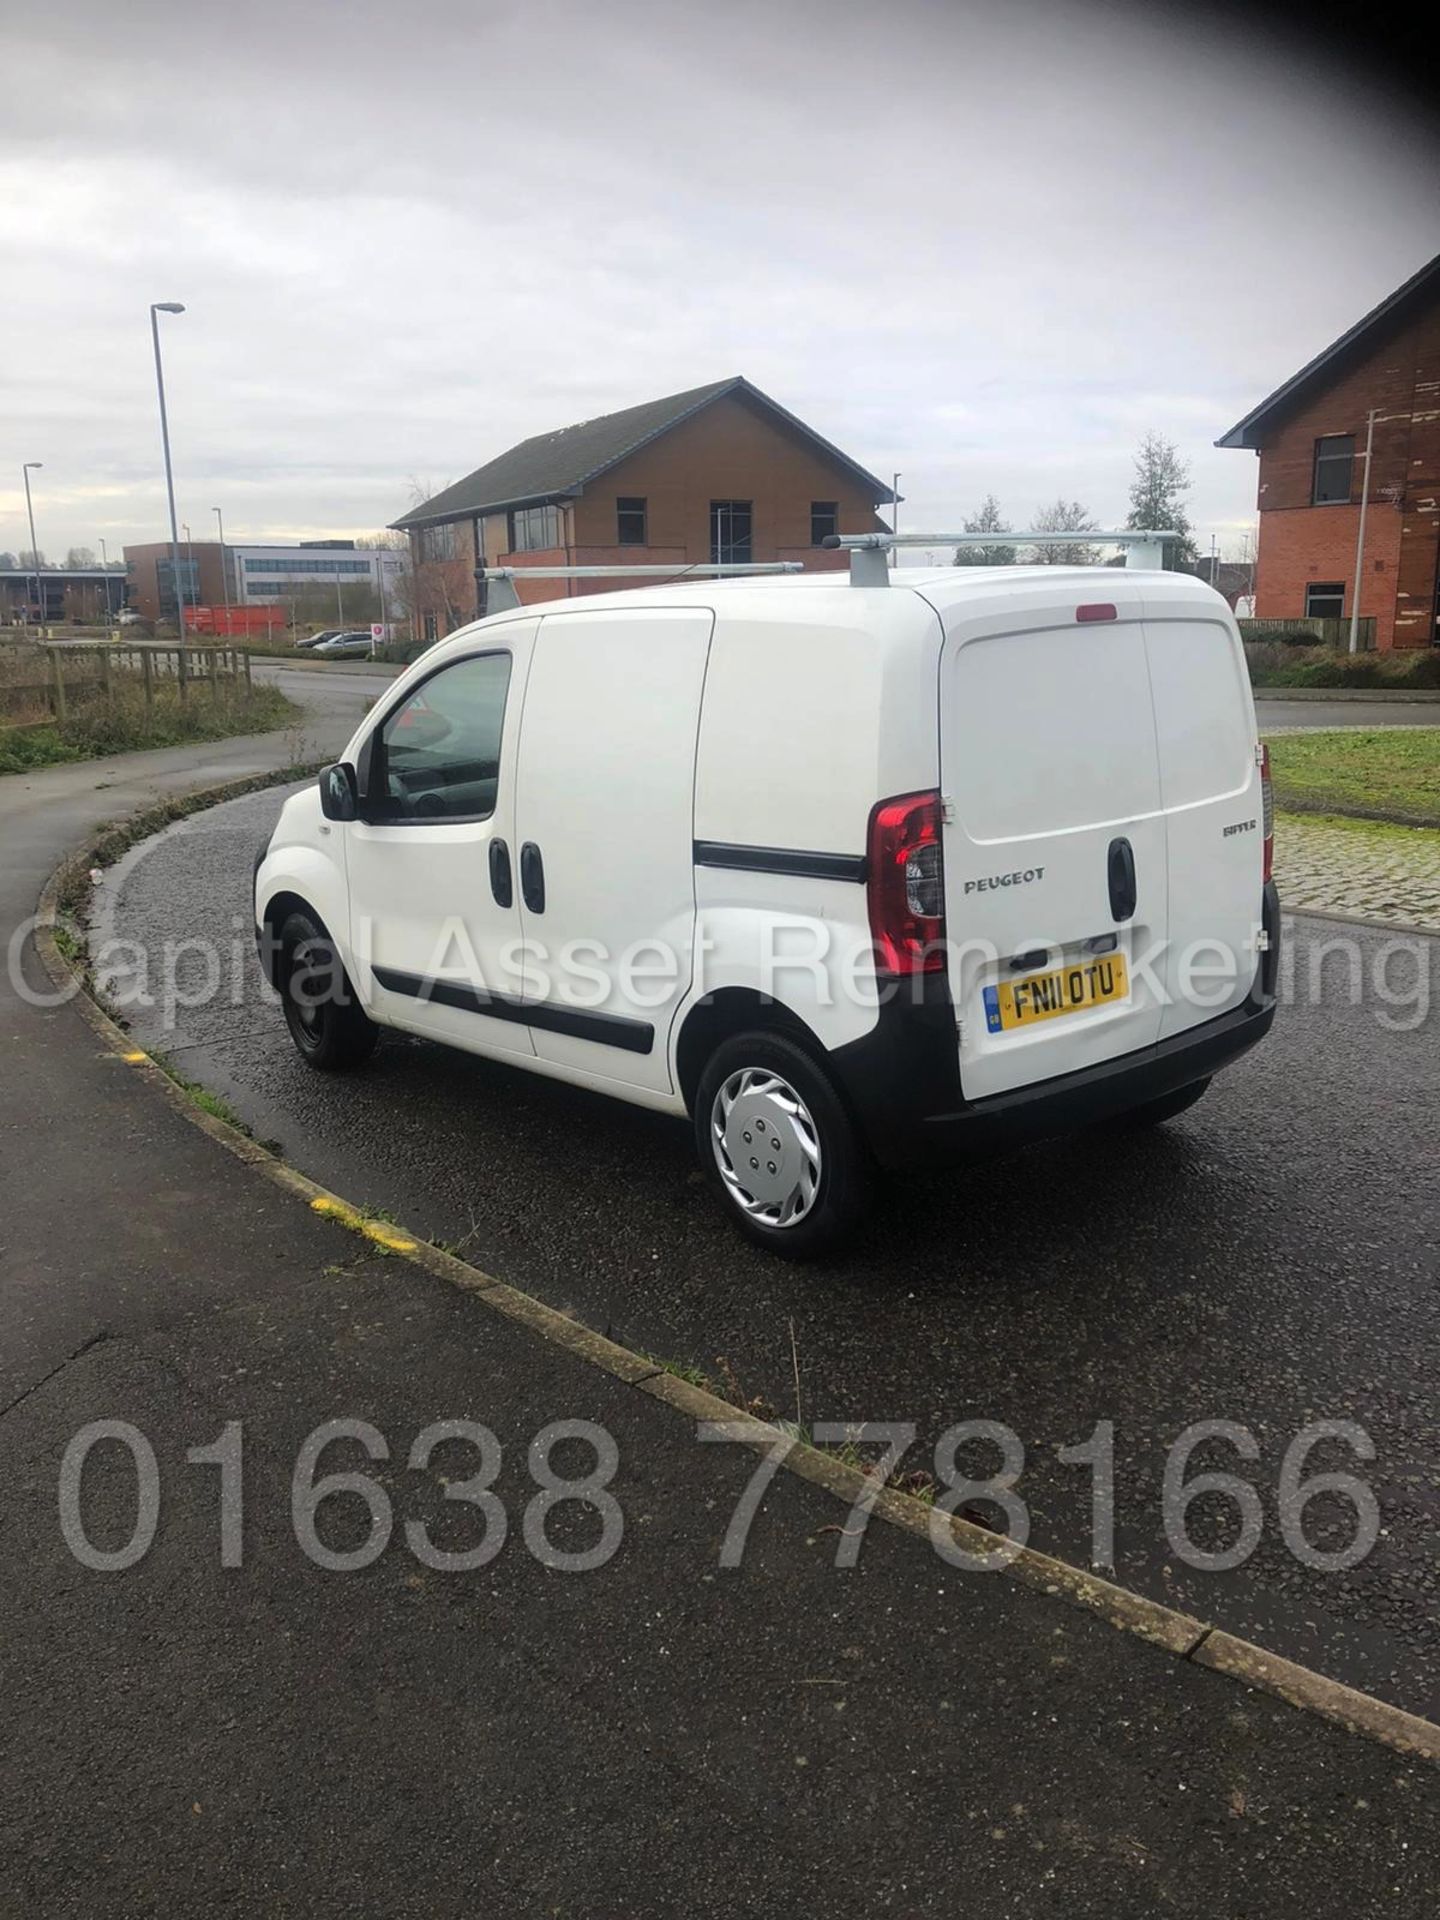 ON SALE PEUGEOT BIPPER *PROFESSIONAL* LCV - PANEL VAN (2011) '1.4 HDI - 5 SPEED' *AIR CON* - Image 4 of 14